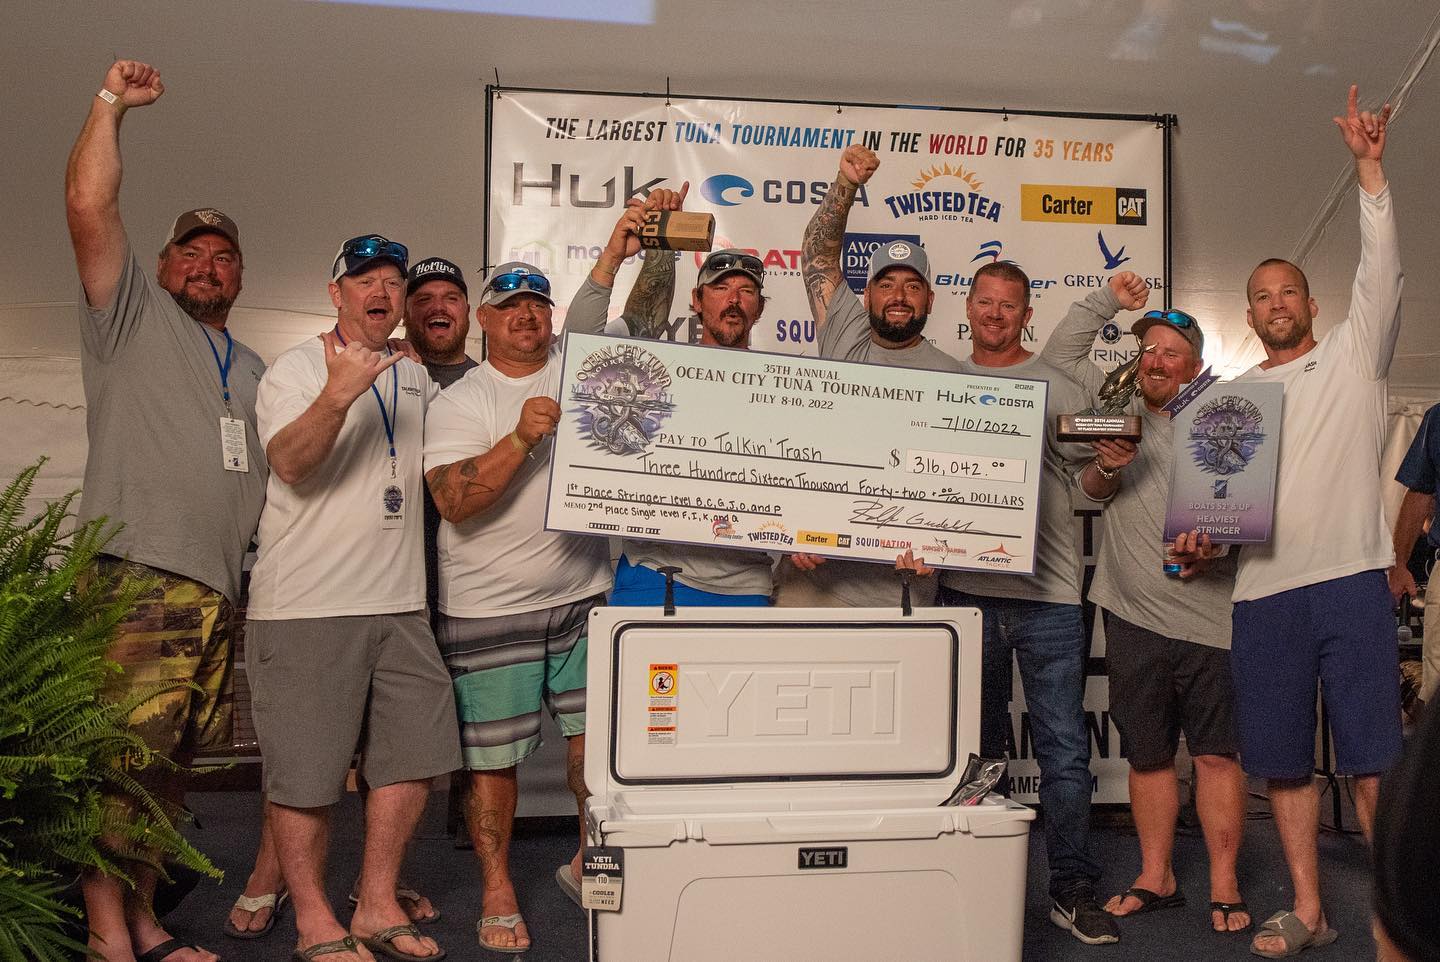 Talkin’ Trash Takes Top Prize of Over $316,000 in 2022 Ocean City Tuna Tournament